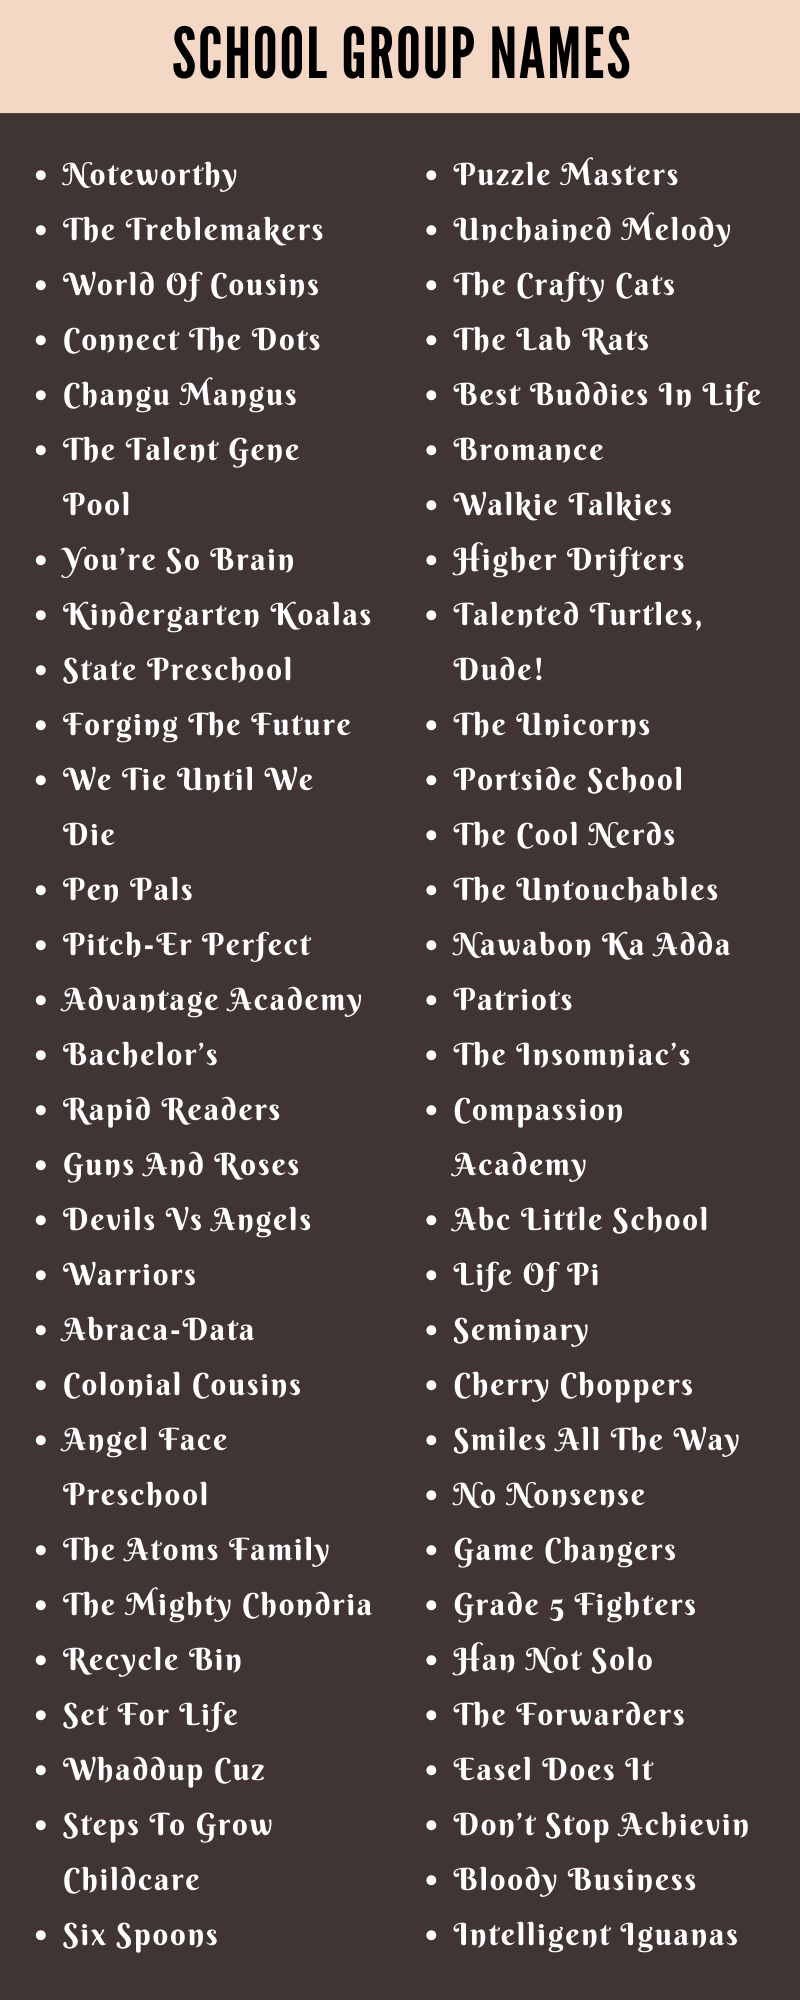 400 Cool School Group Names Ideas and Suggestions